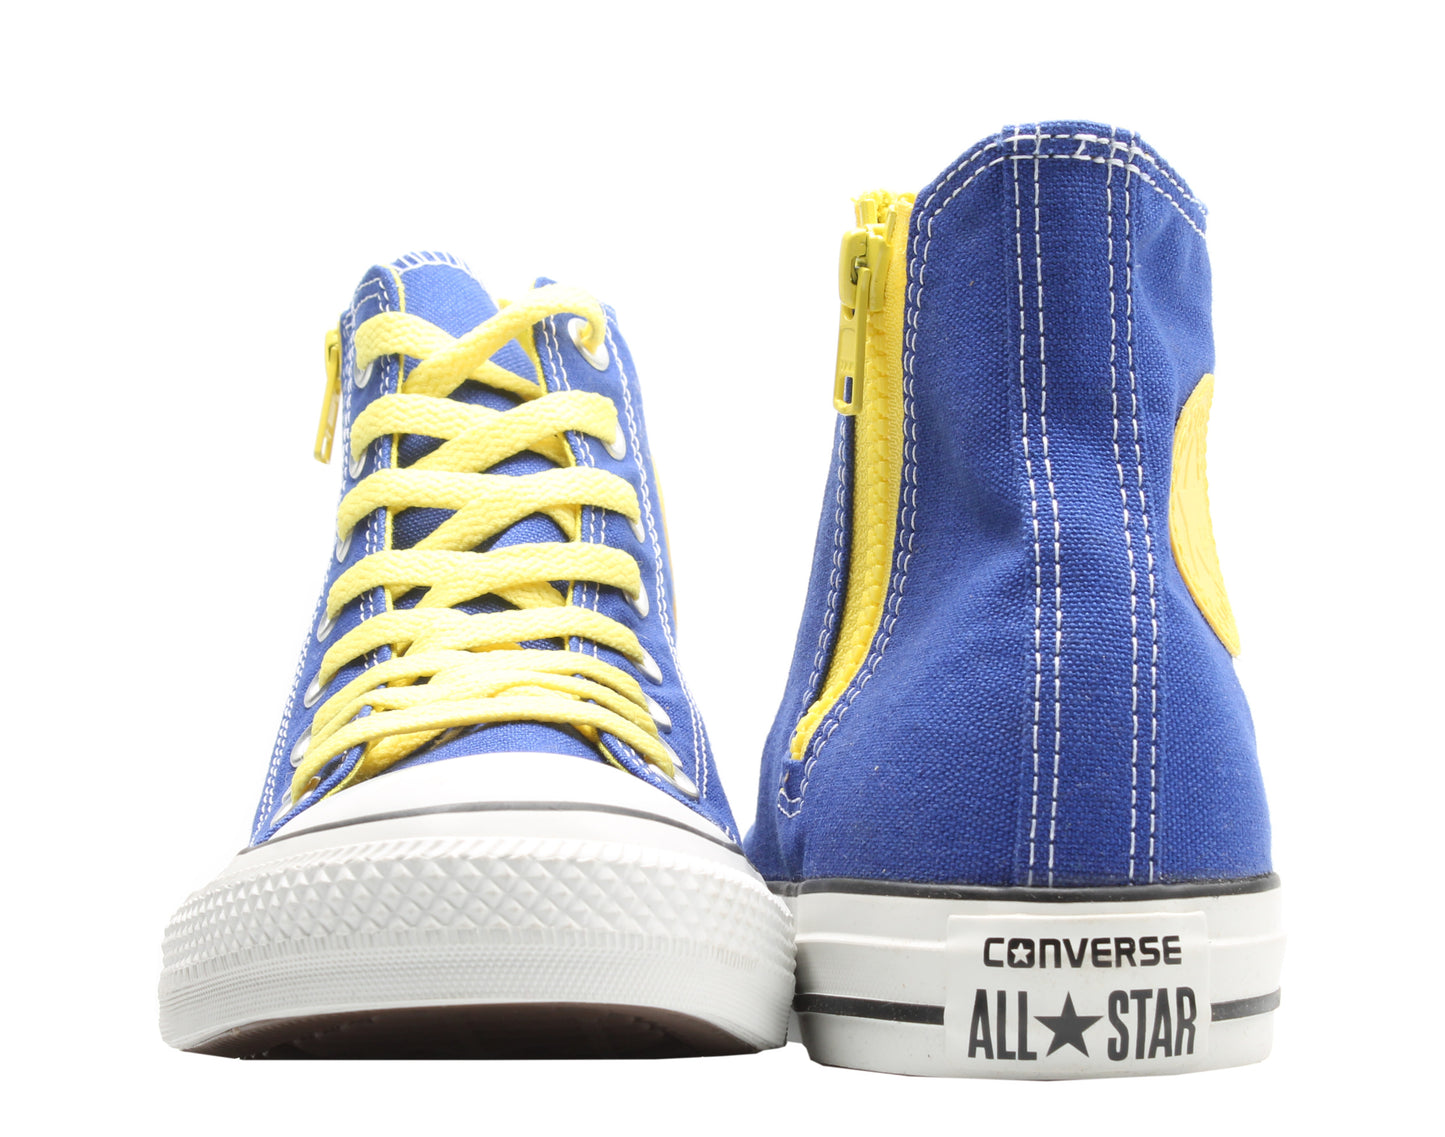 Converse Chuck Taylor All Star Side Zip Hi Sneakers